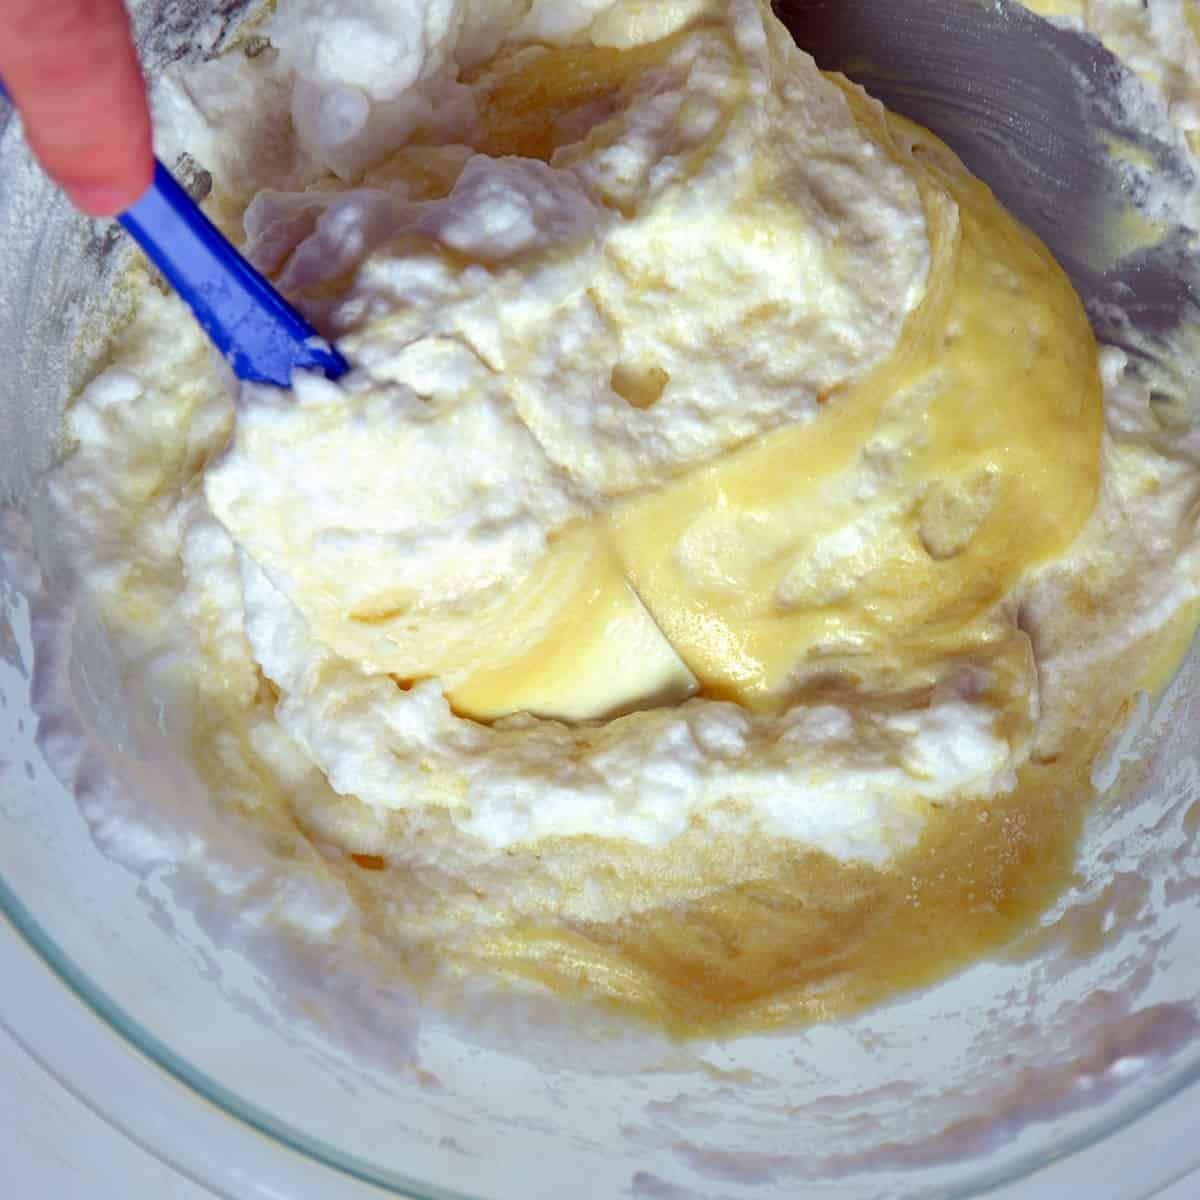 Cake batter and egg whites starting to mix with a rubber spat in the mixture.